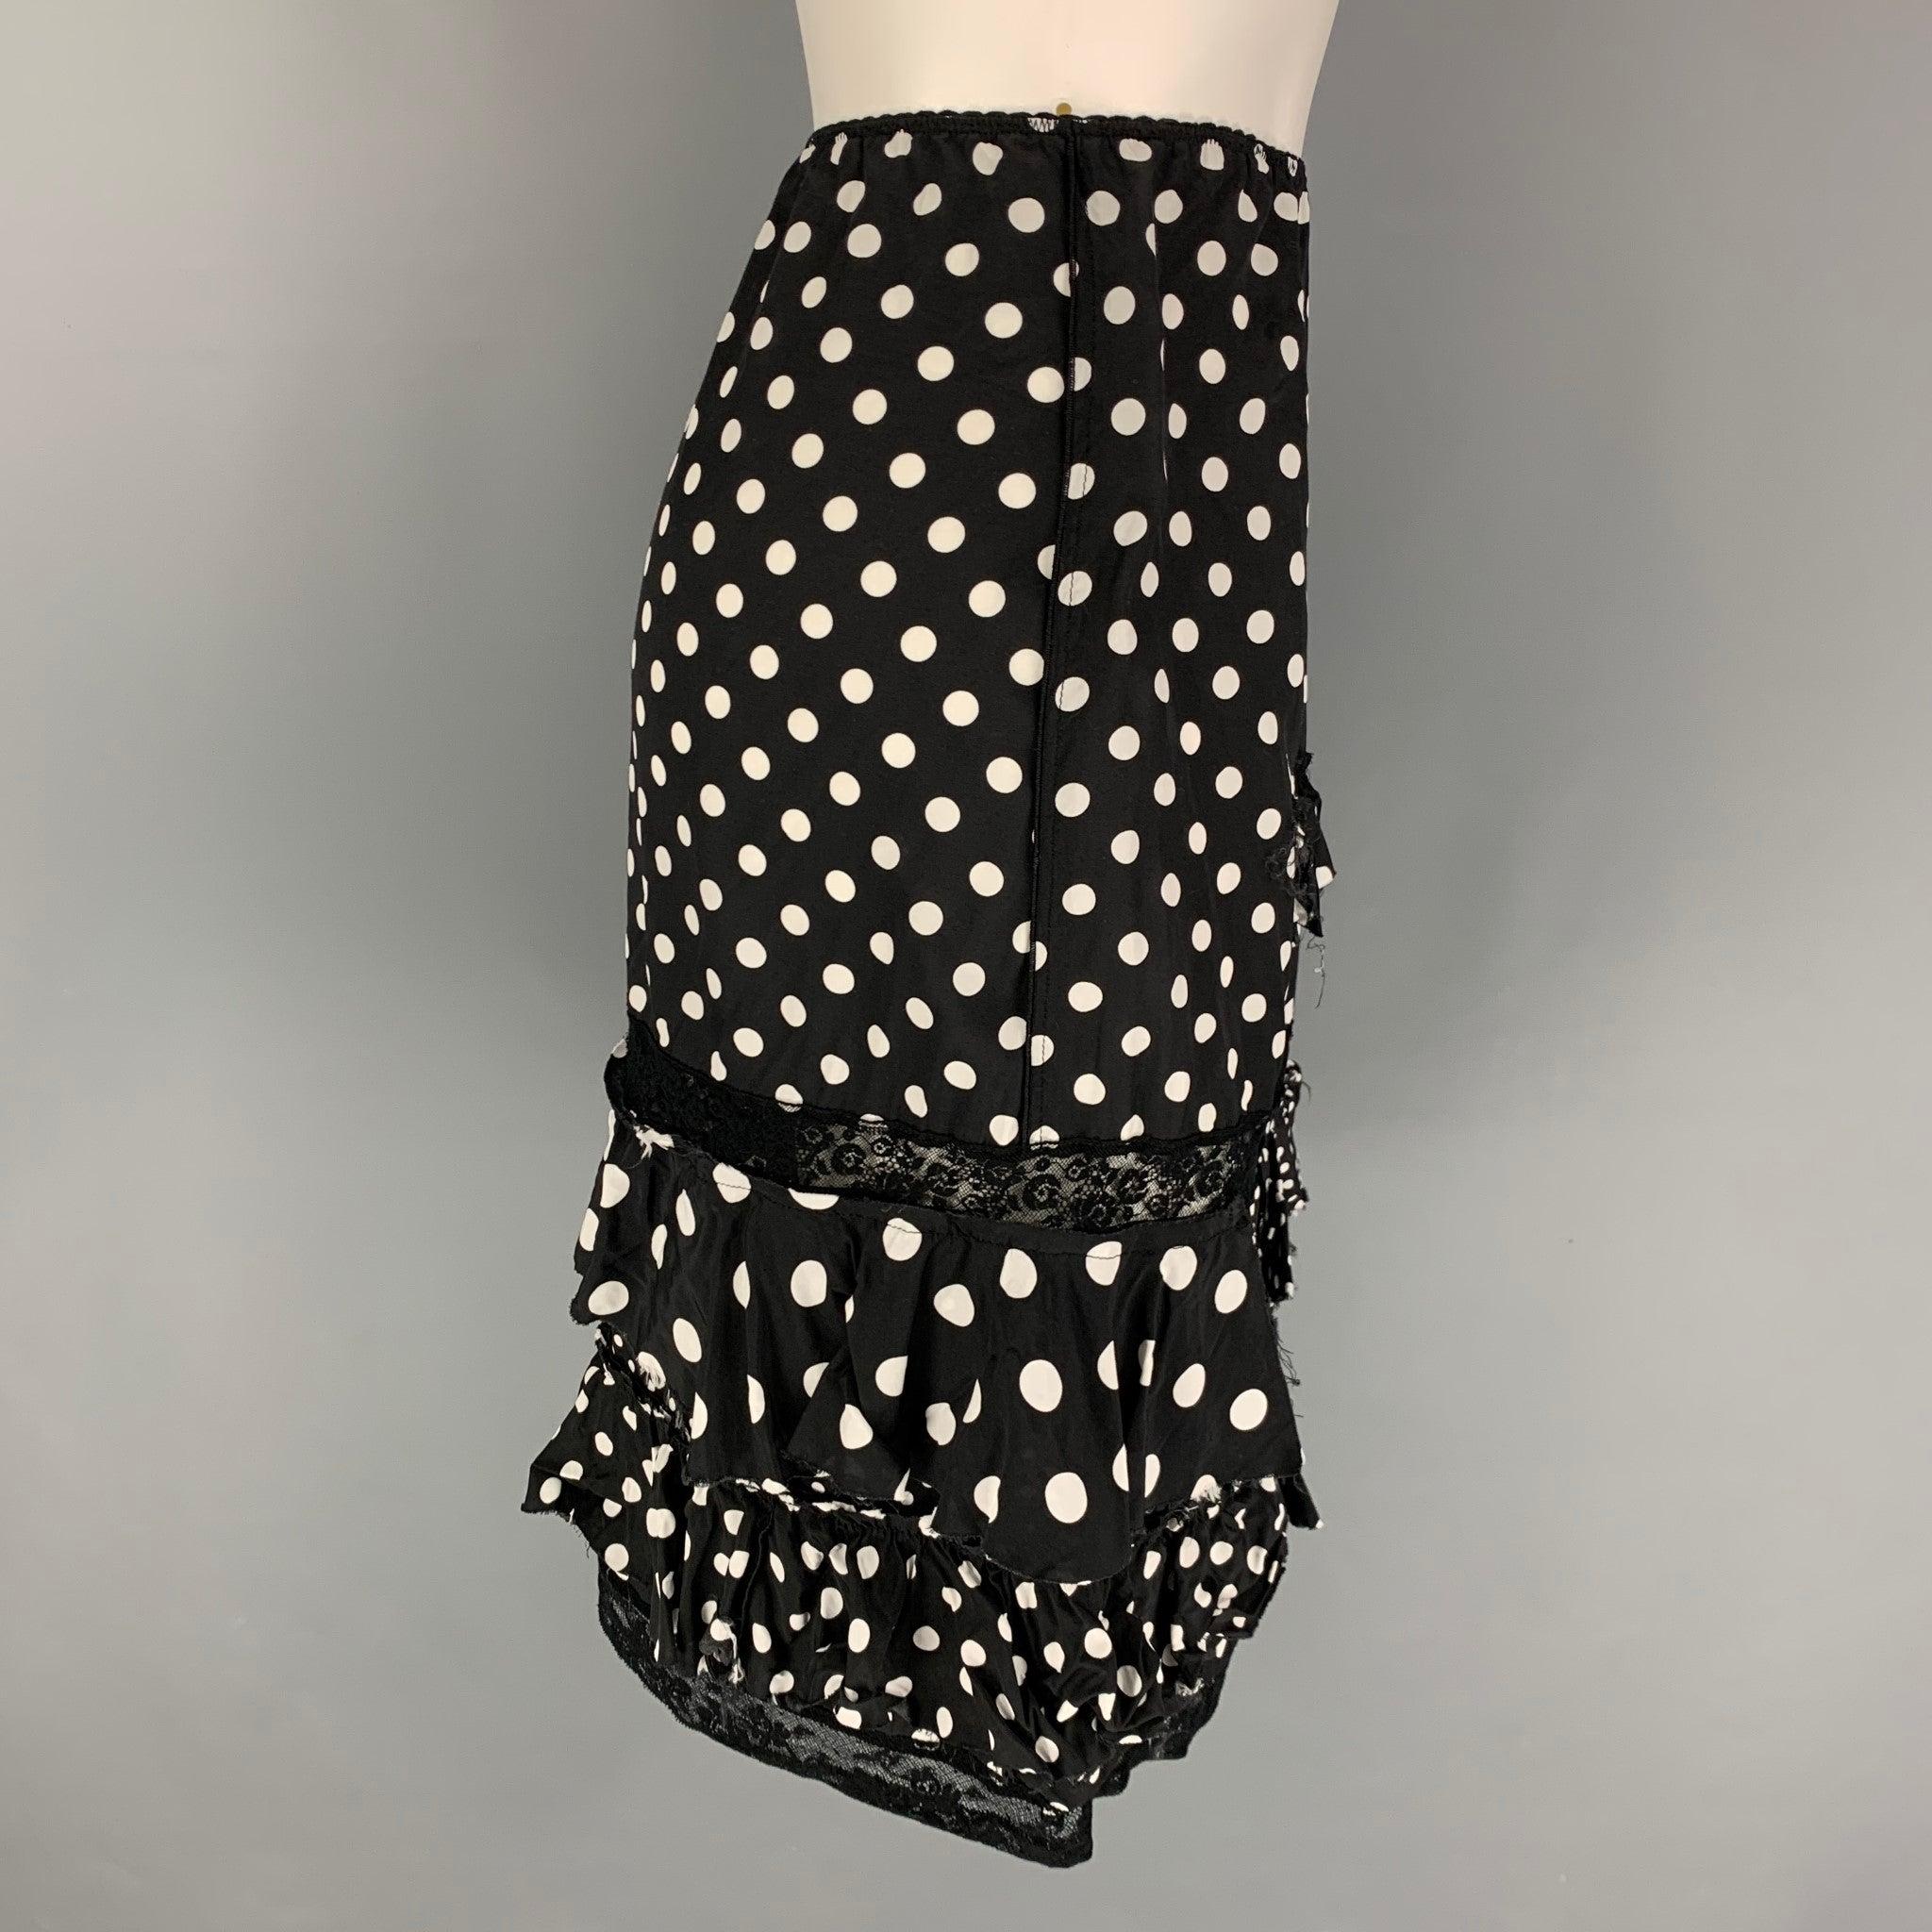 MARC by MARC JACOBS skirt comes in a black & white polka dot viscose featuring a ruffled style, side zipper, and a elastic waistband.
Very Good
Pre-Owned Condition. 

Marked:   0 

Measurements: 
  Waist: 24 inches  Hip: 38 inches Length: 21 inches